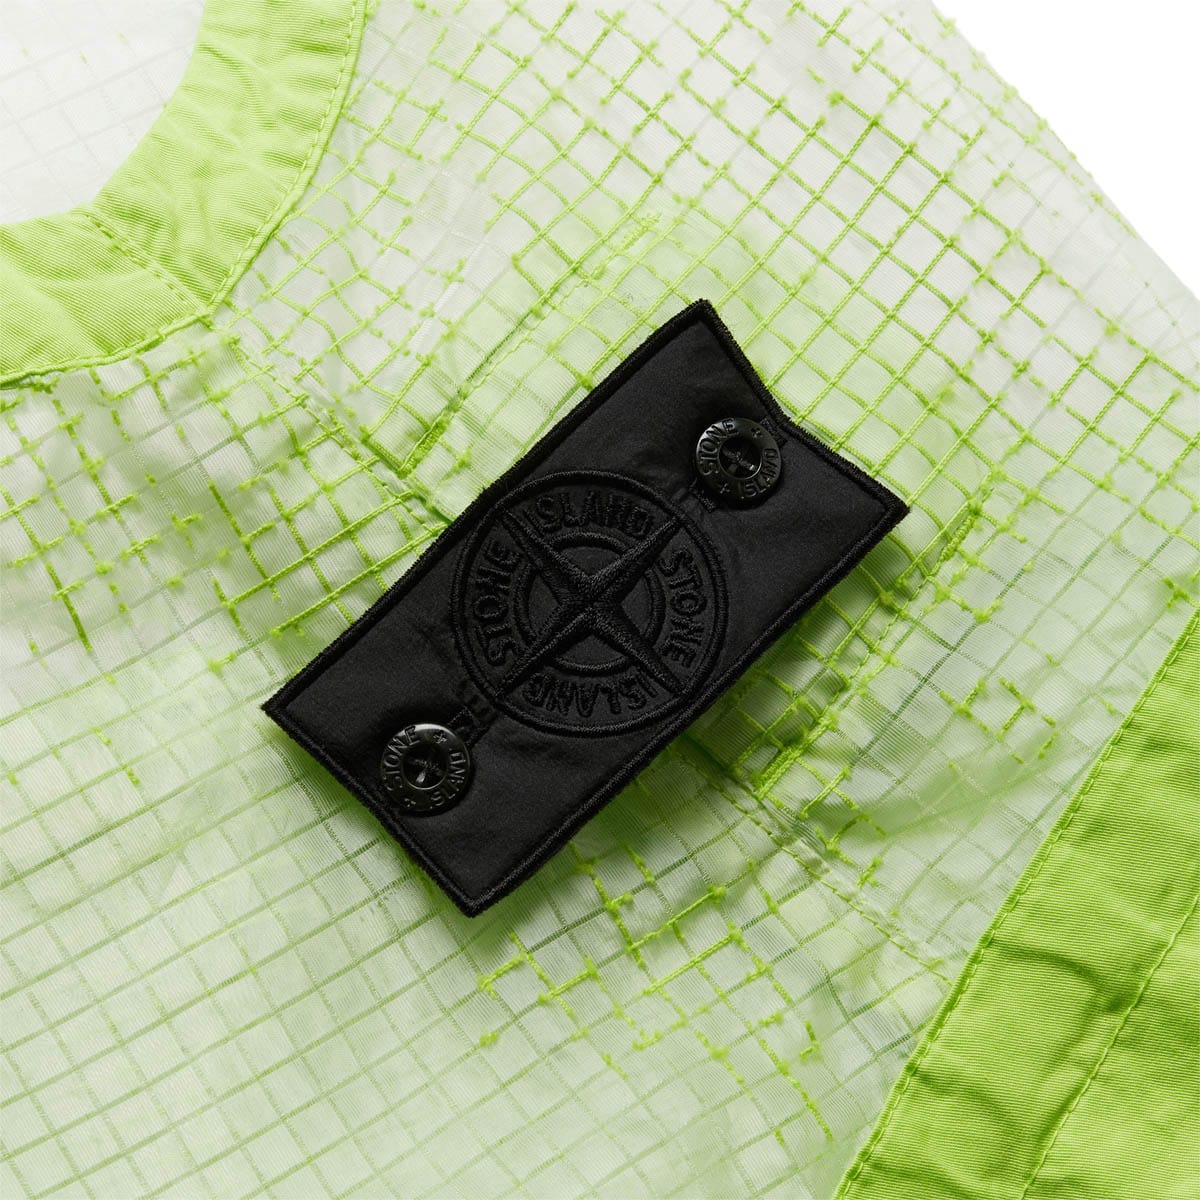 Stone Island Shadow Project Outerwear V2051 / L DEVORE VEST 7819 - G02 - 23